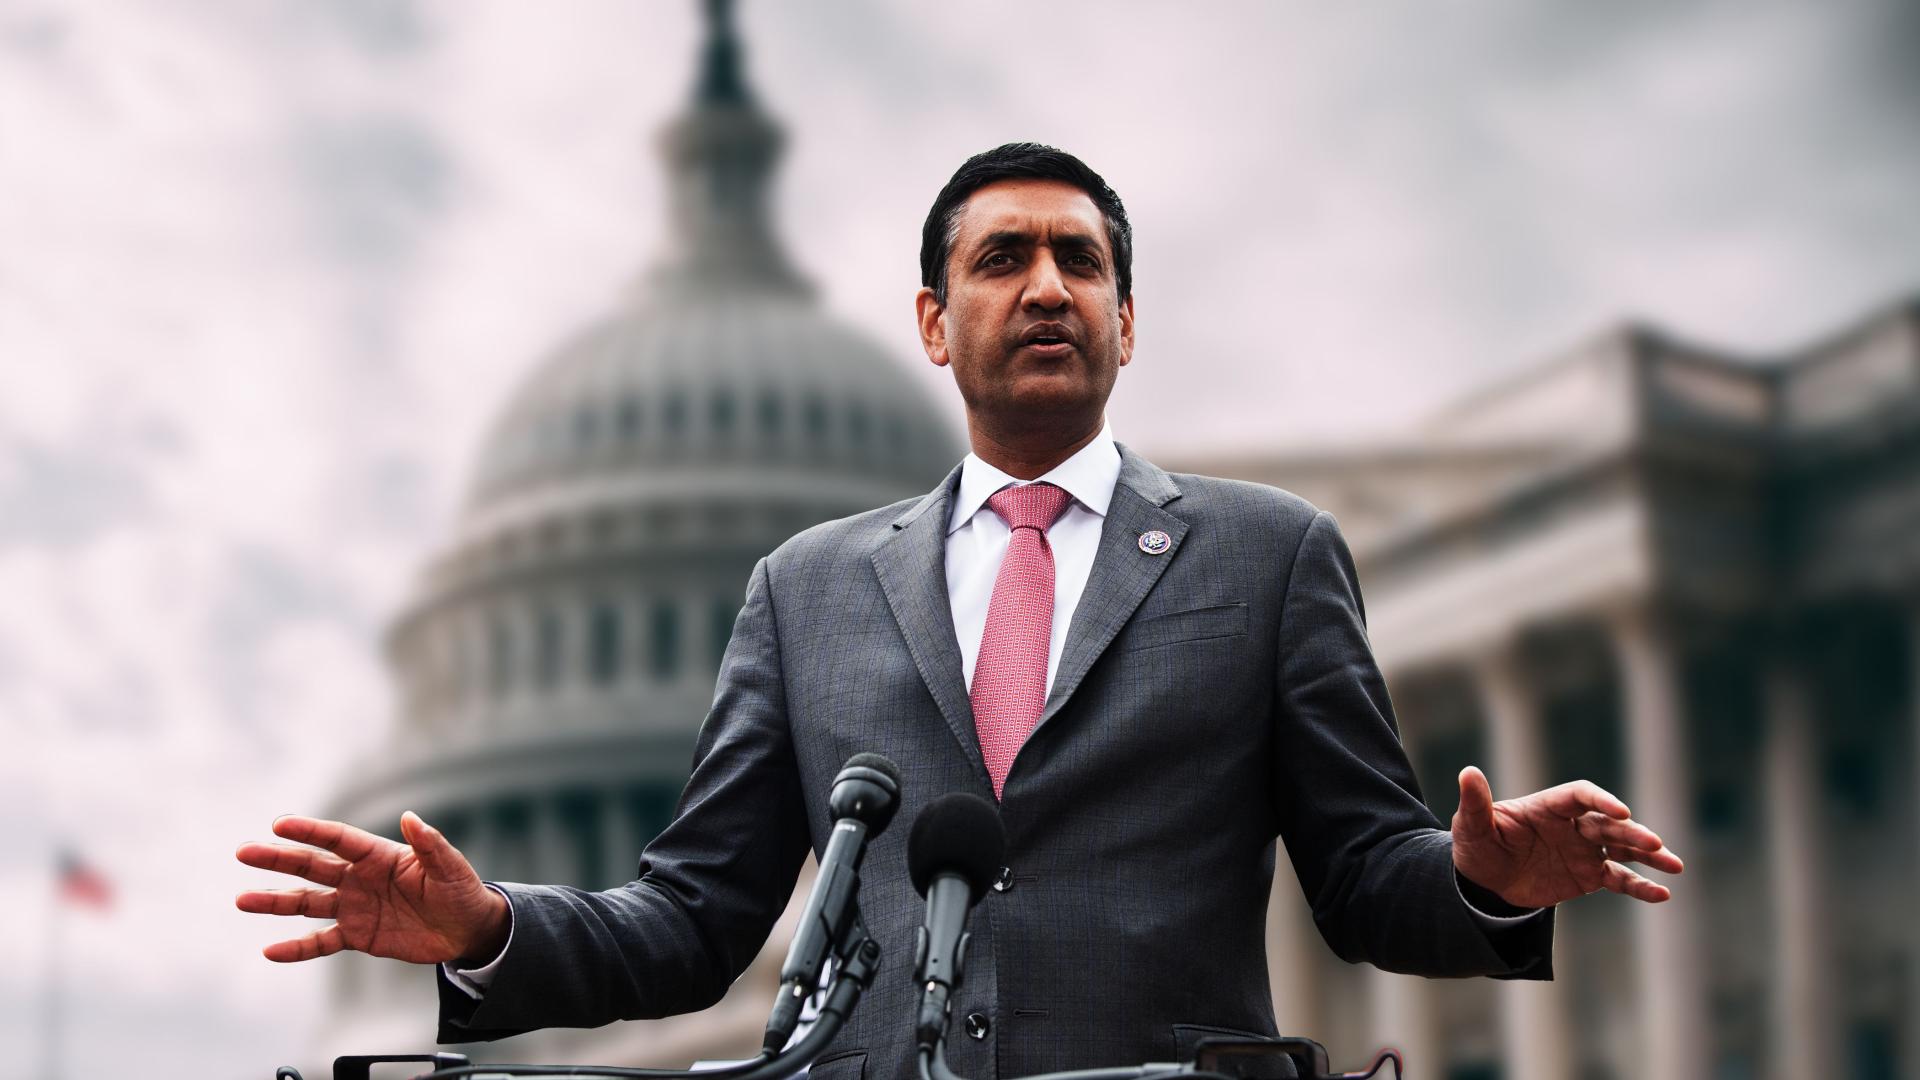 Khanna Voices Support for Speaker Johnson Amid Leadership Concerns